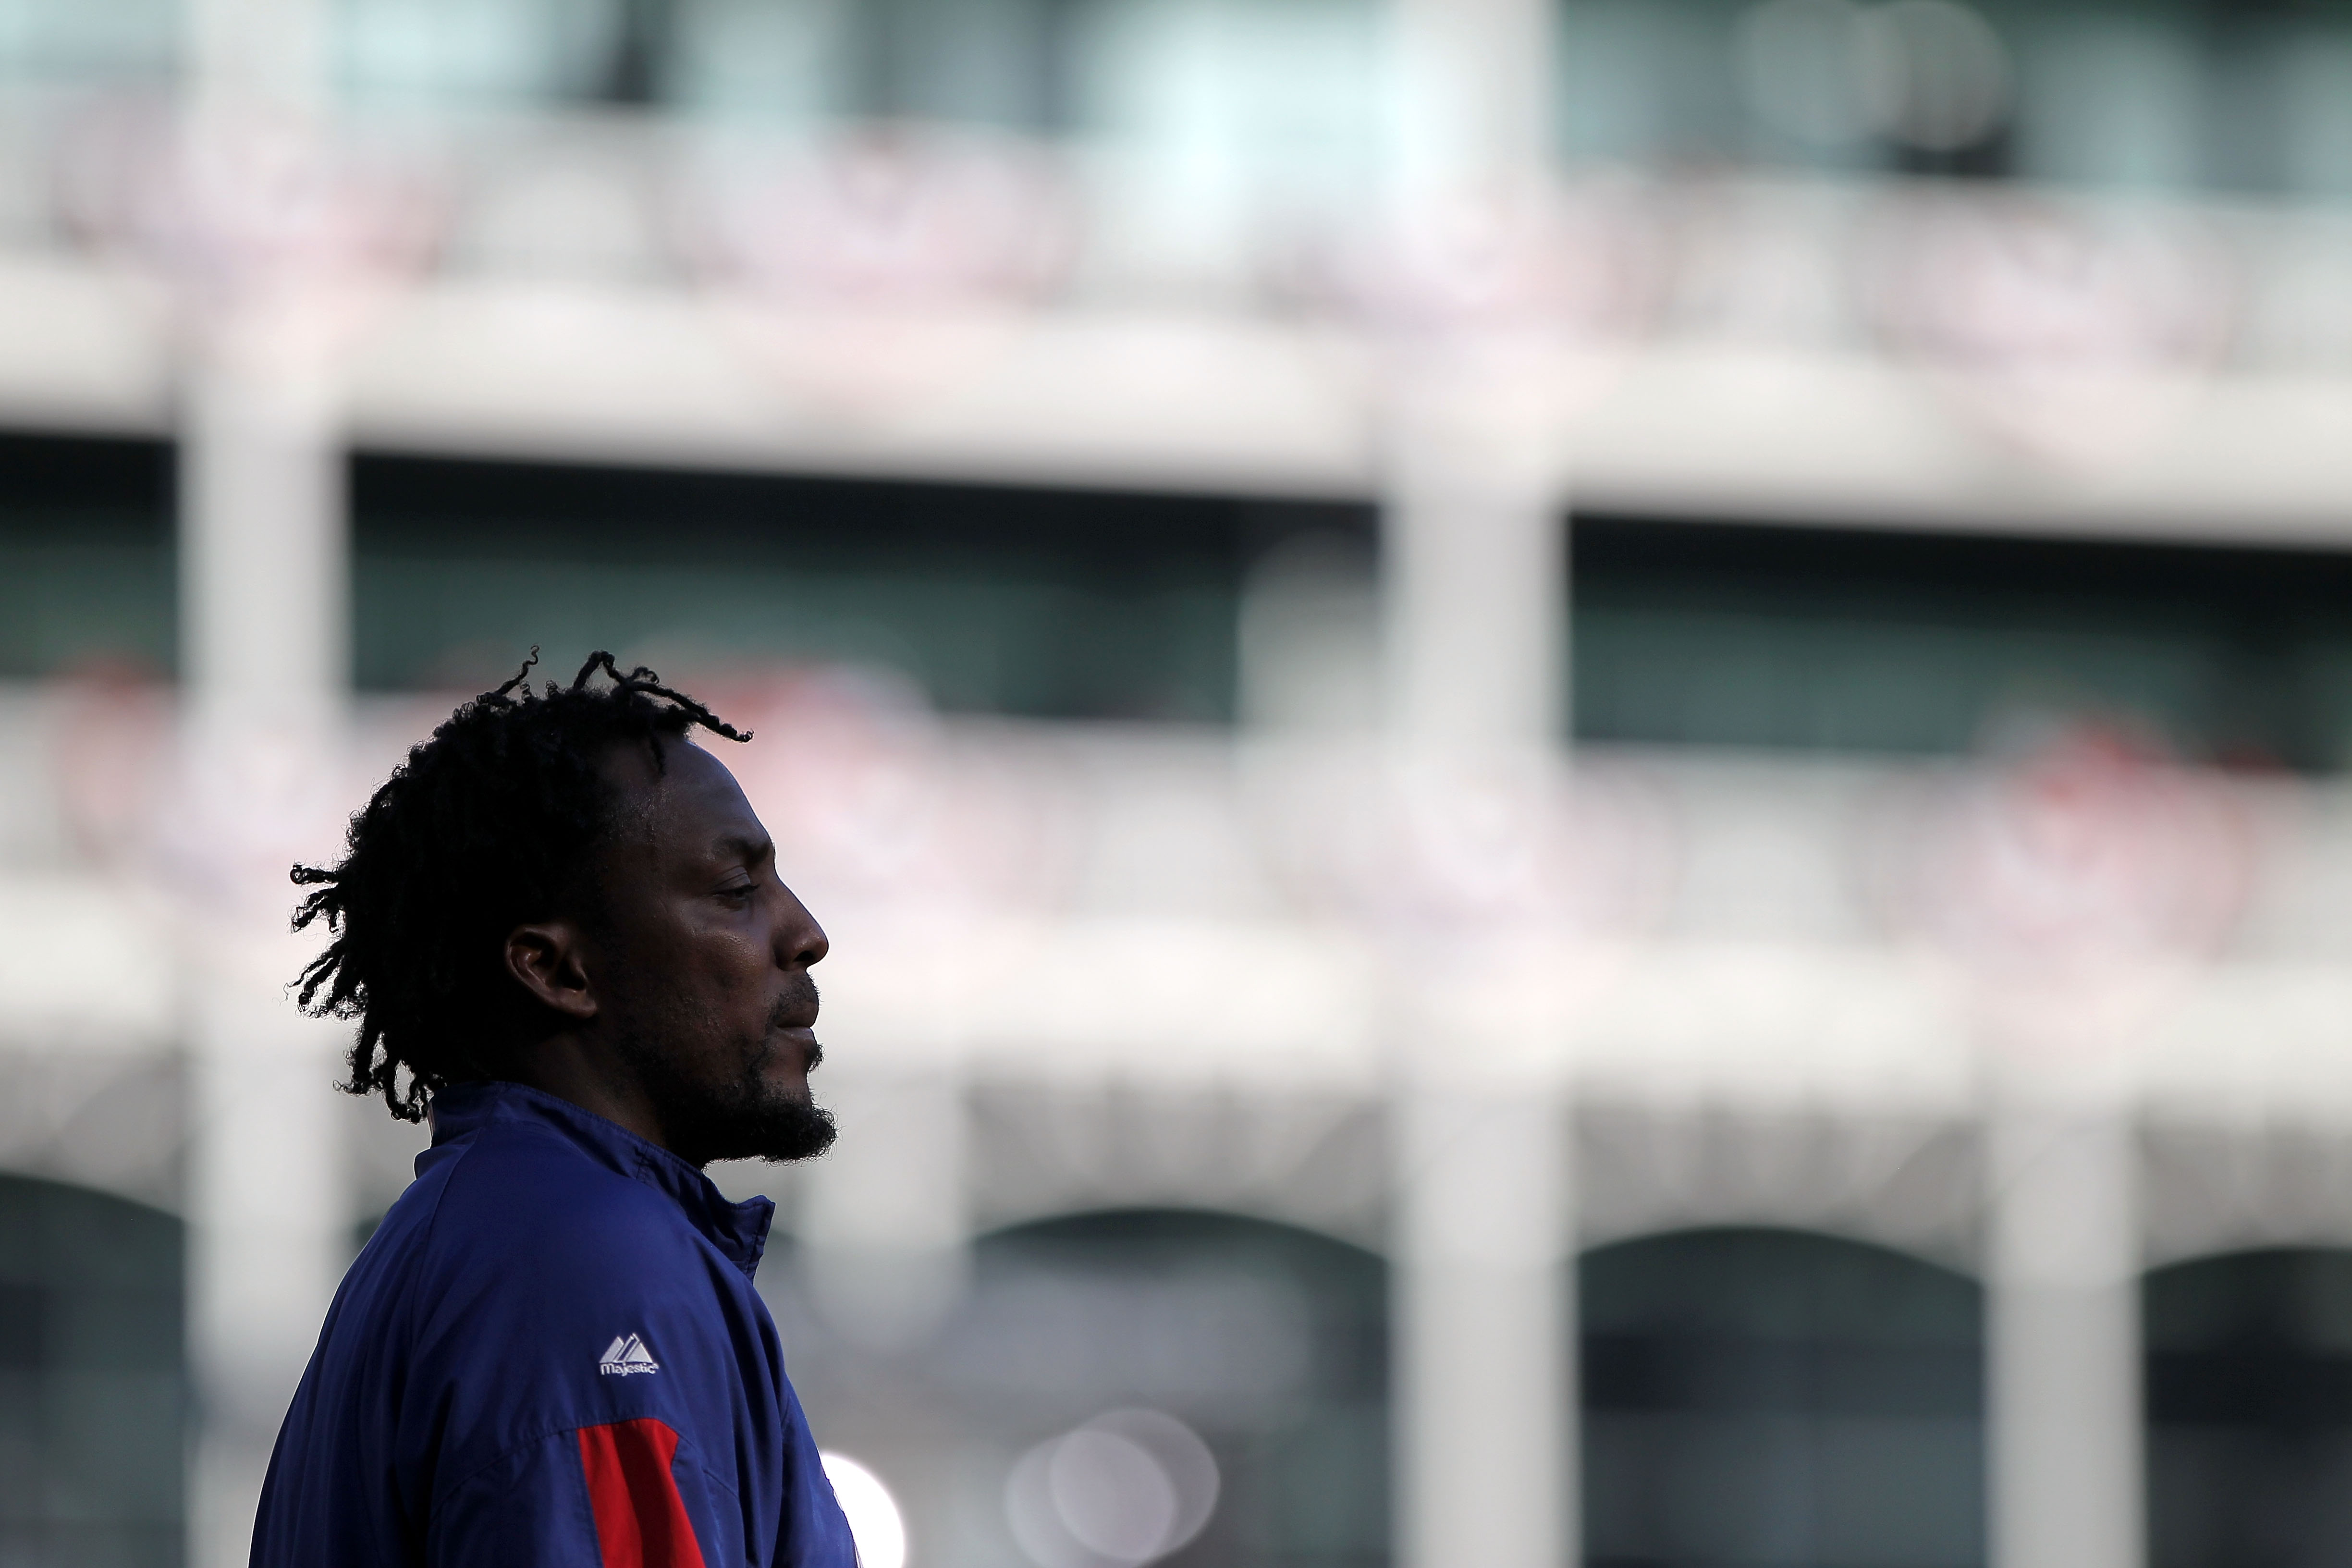 ARLINGTON, TX - NOVEMBER 01:  Vladimir Guerrero #27 of the Texas Rangers looks on during batting practice against the San Francisco Giants in Game Five of the 2010 MLB World Series at Rangers Ballpark in Arlington on November 1, 2010 in Arlington, Texas.